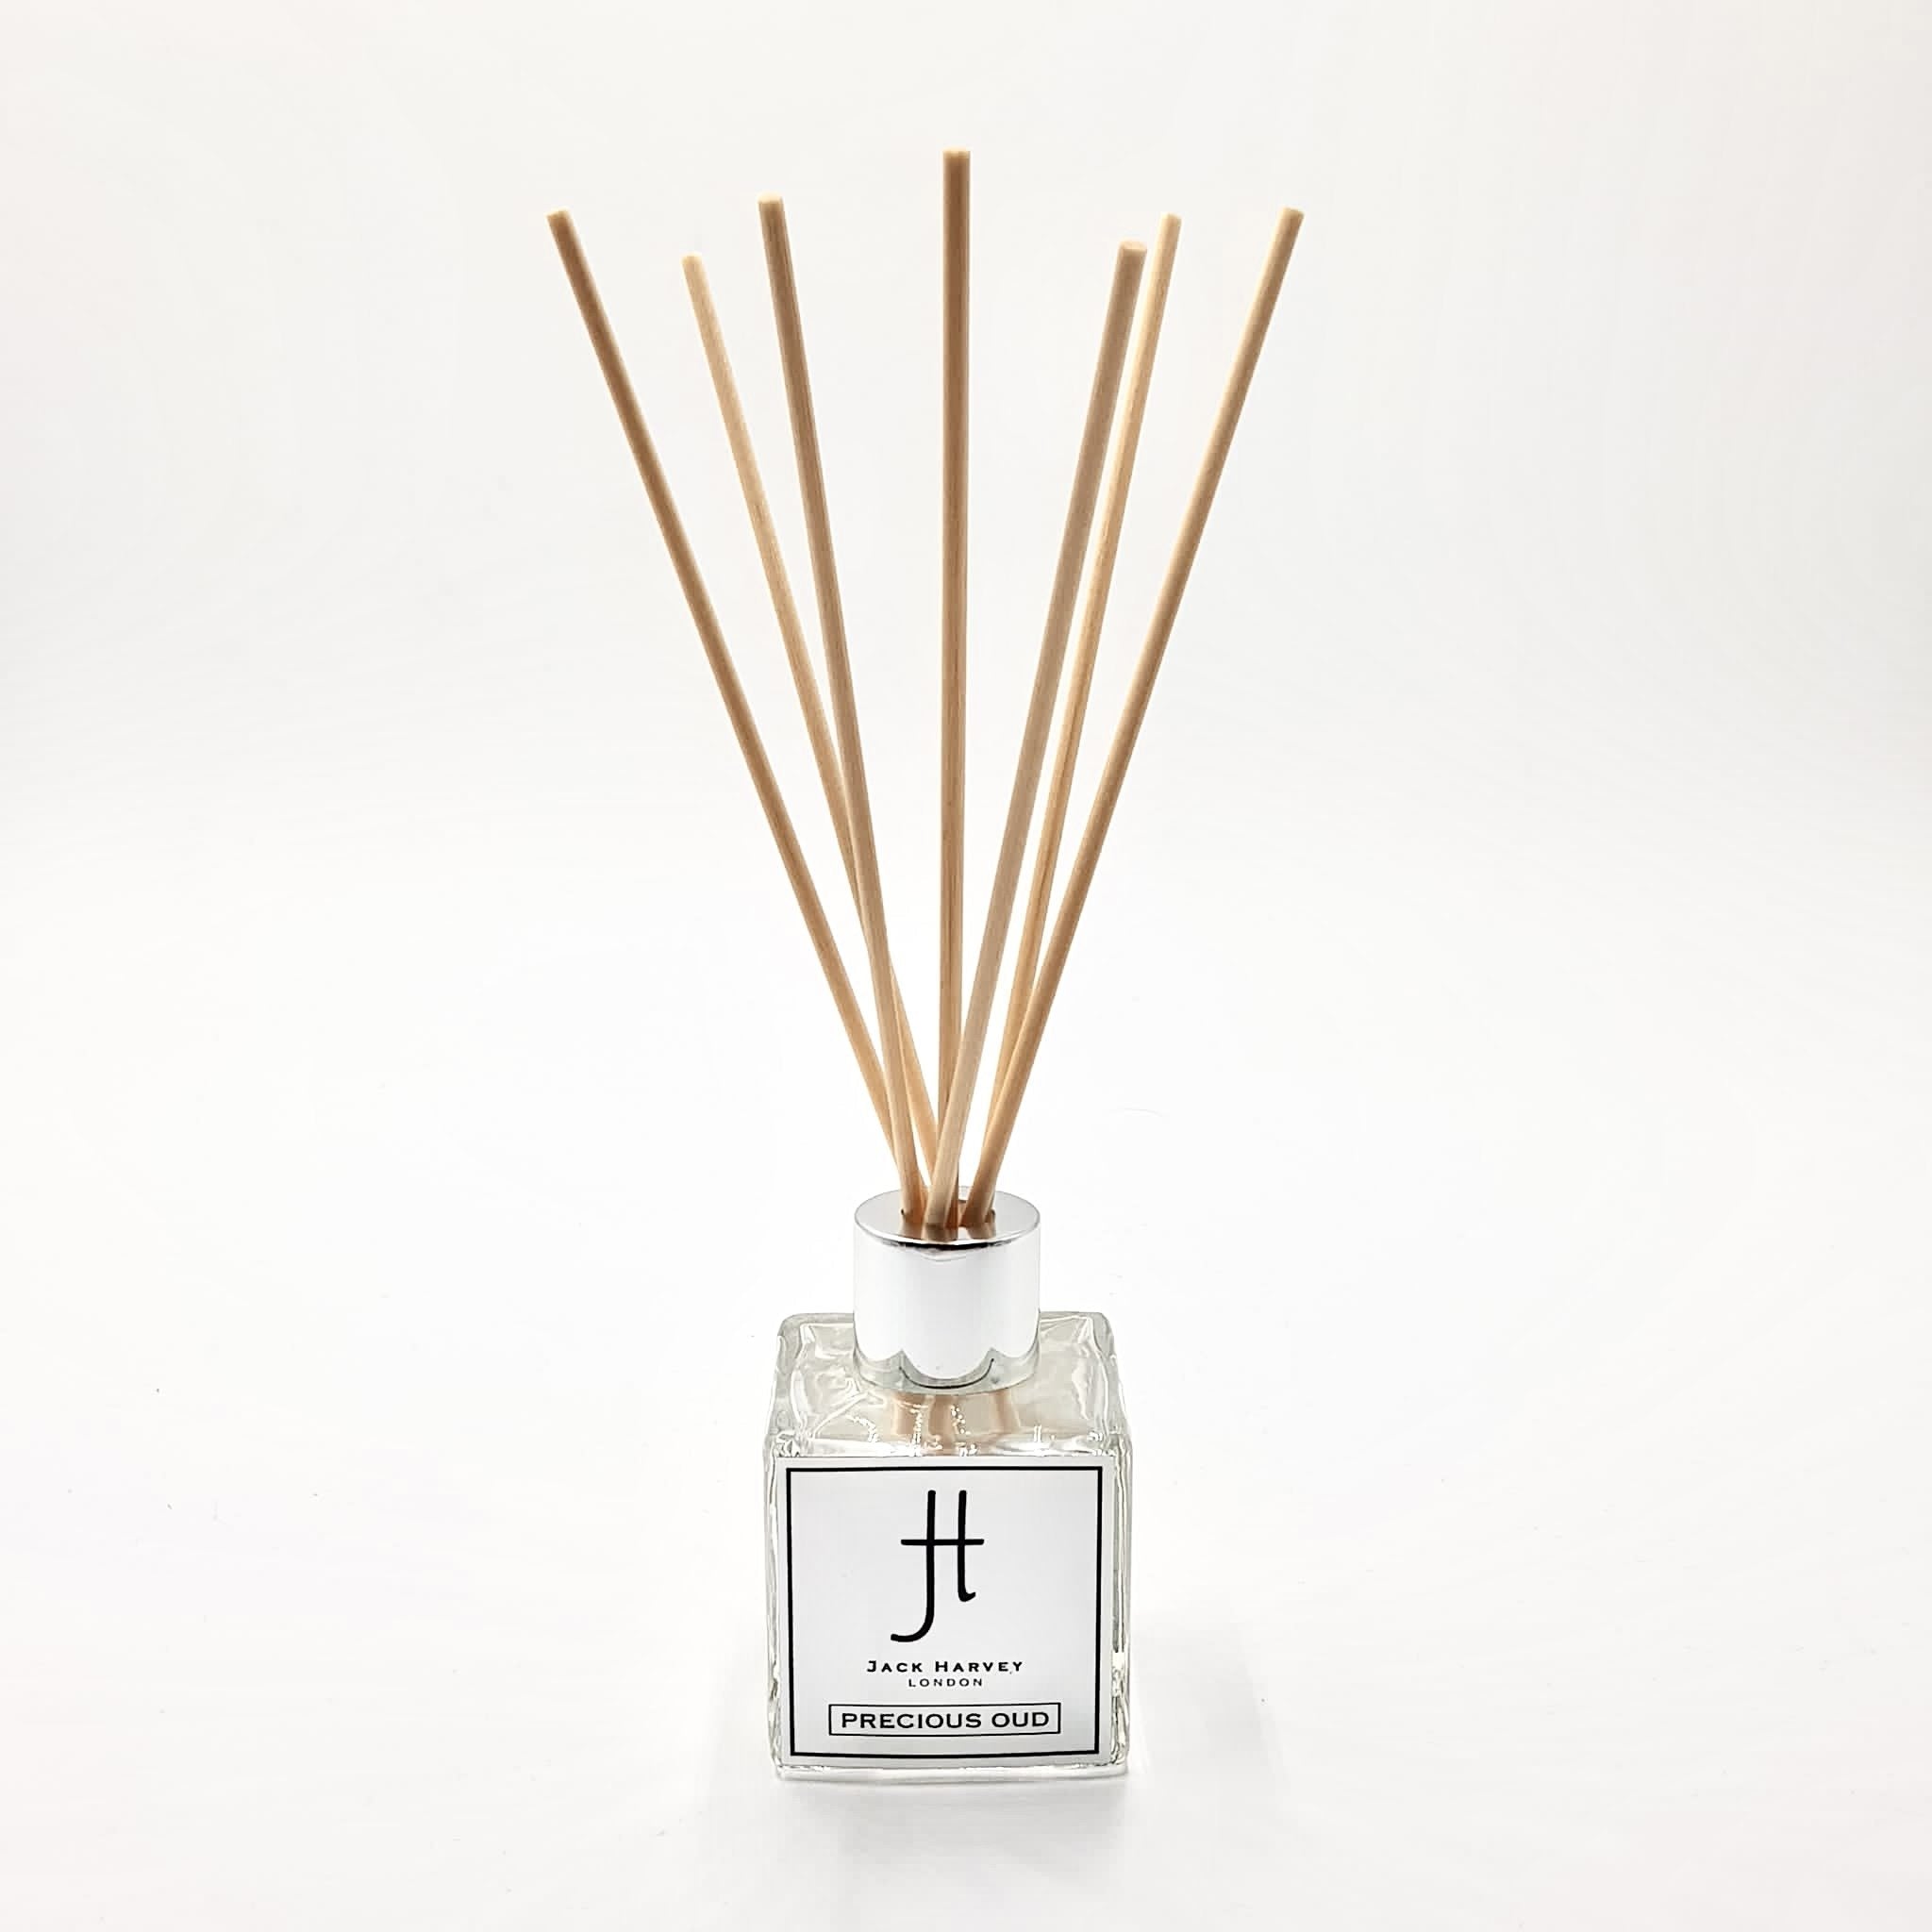 PARK LANE MINI 50ml LIMITED EDITION - LUXURY REED DIFFUSER